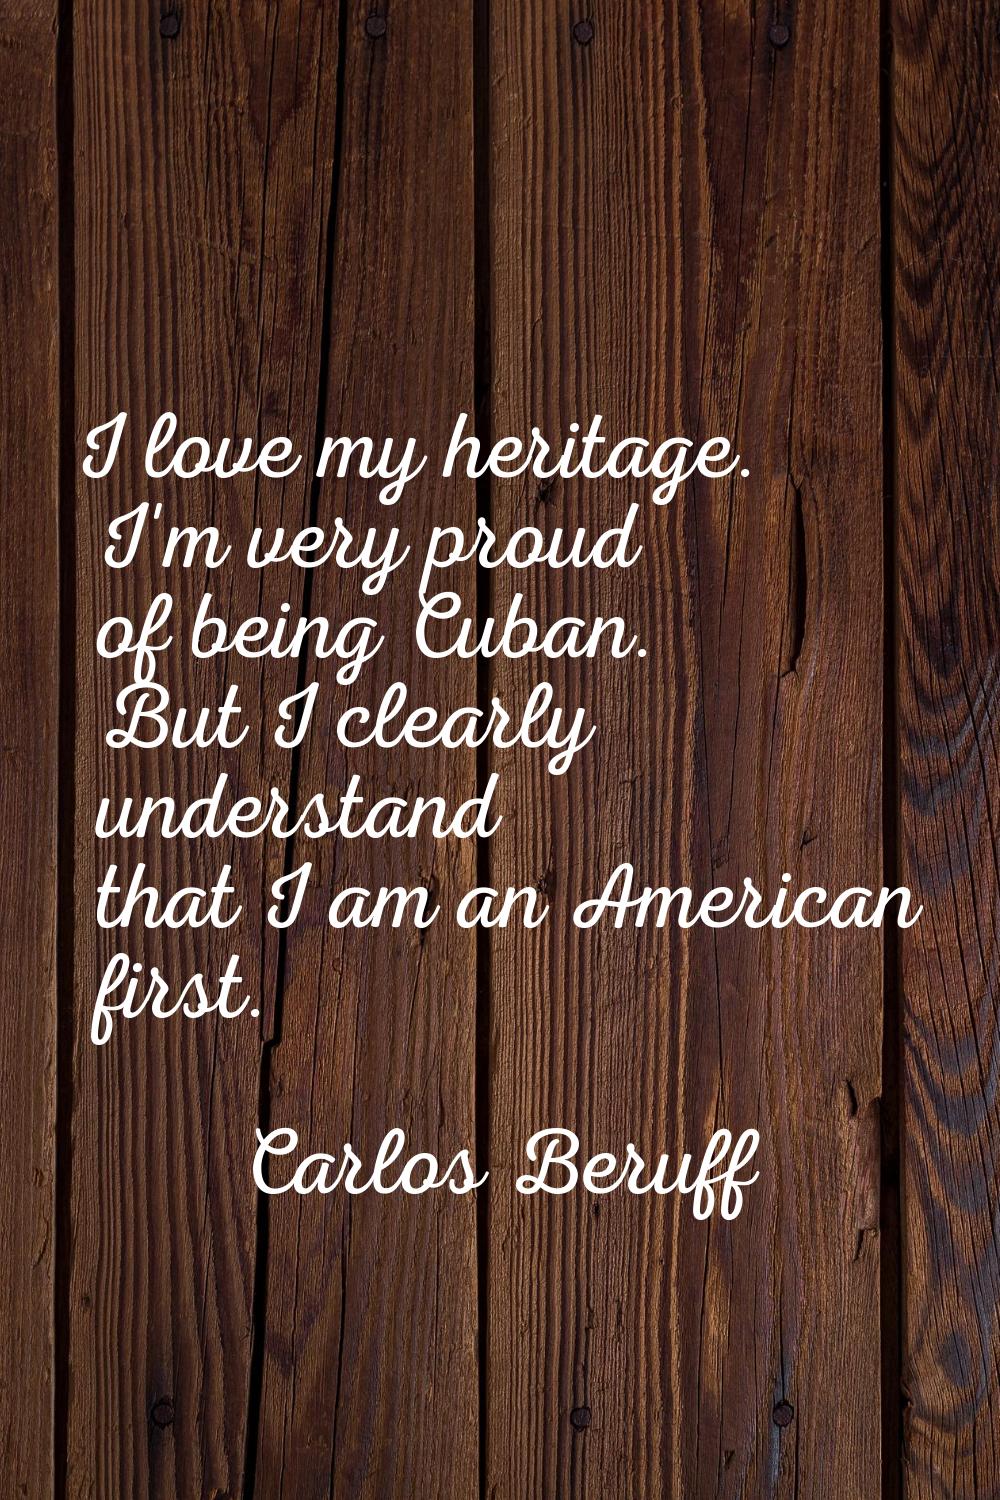 I love my heritage. I'm very proud of being Cuban. But I clearly understand that I am an American f